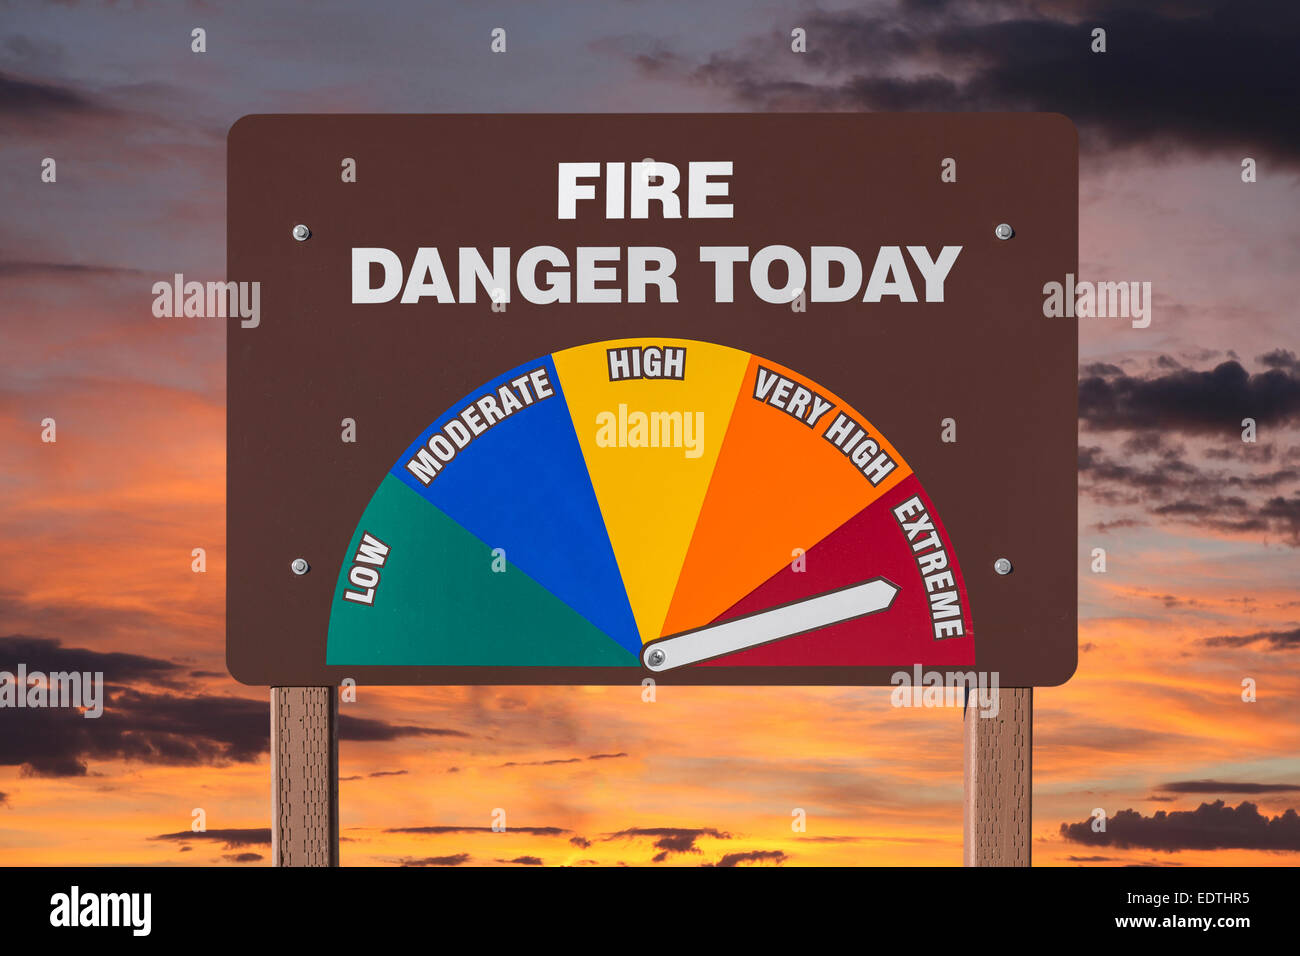 Extreme fire danger today sign with orange sunrise. Stock Photo